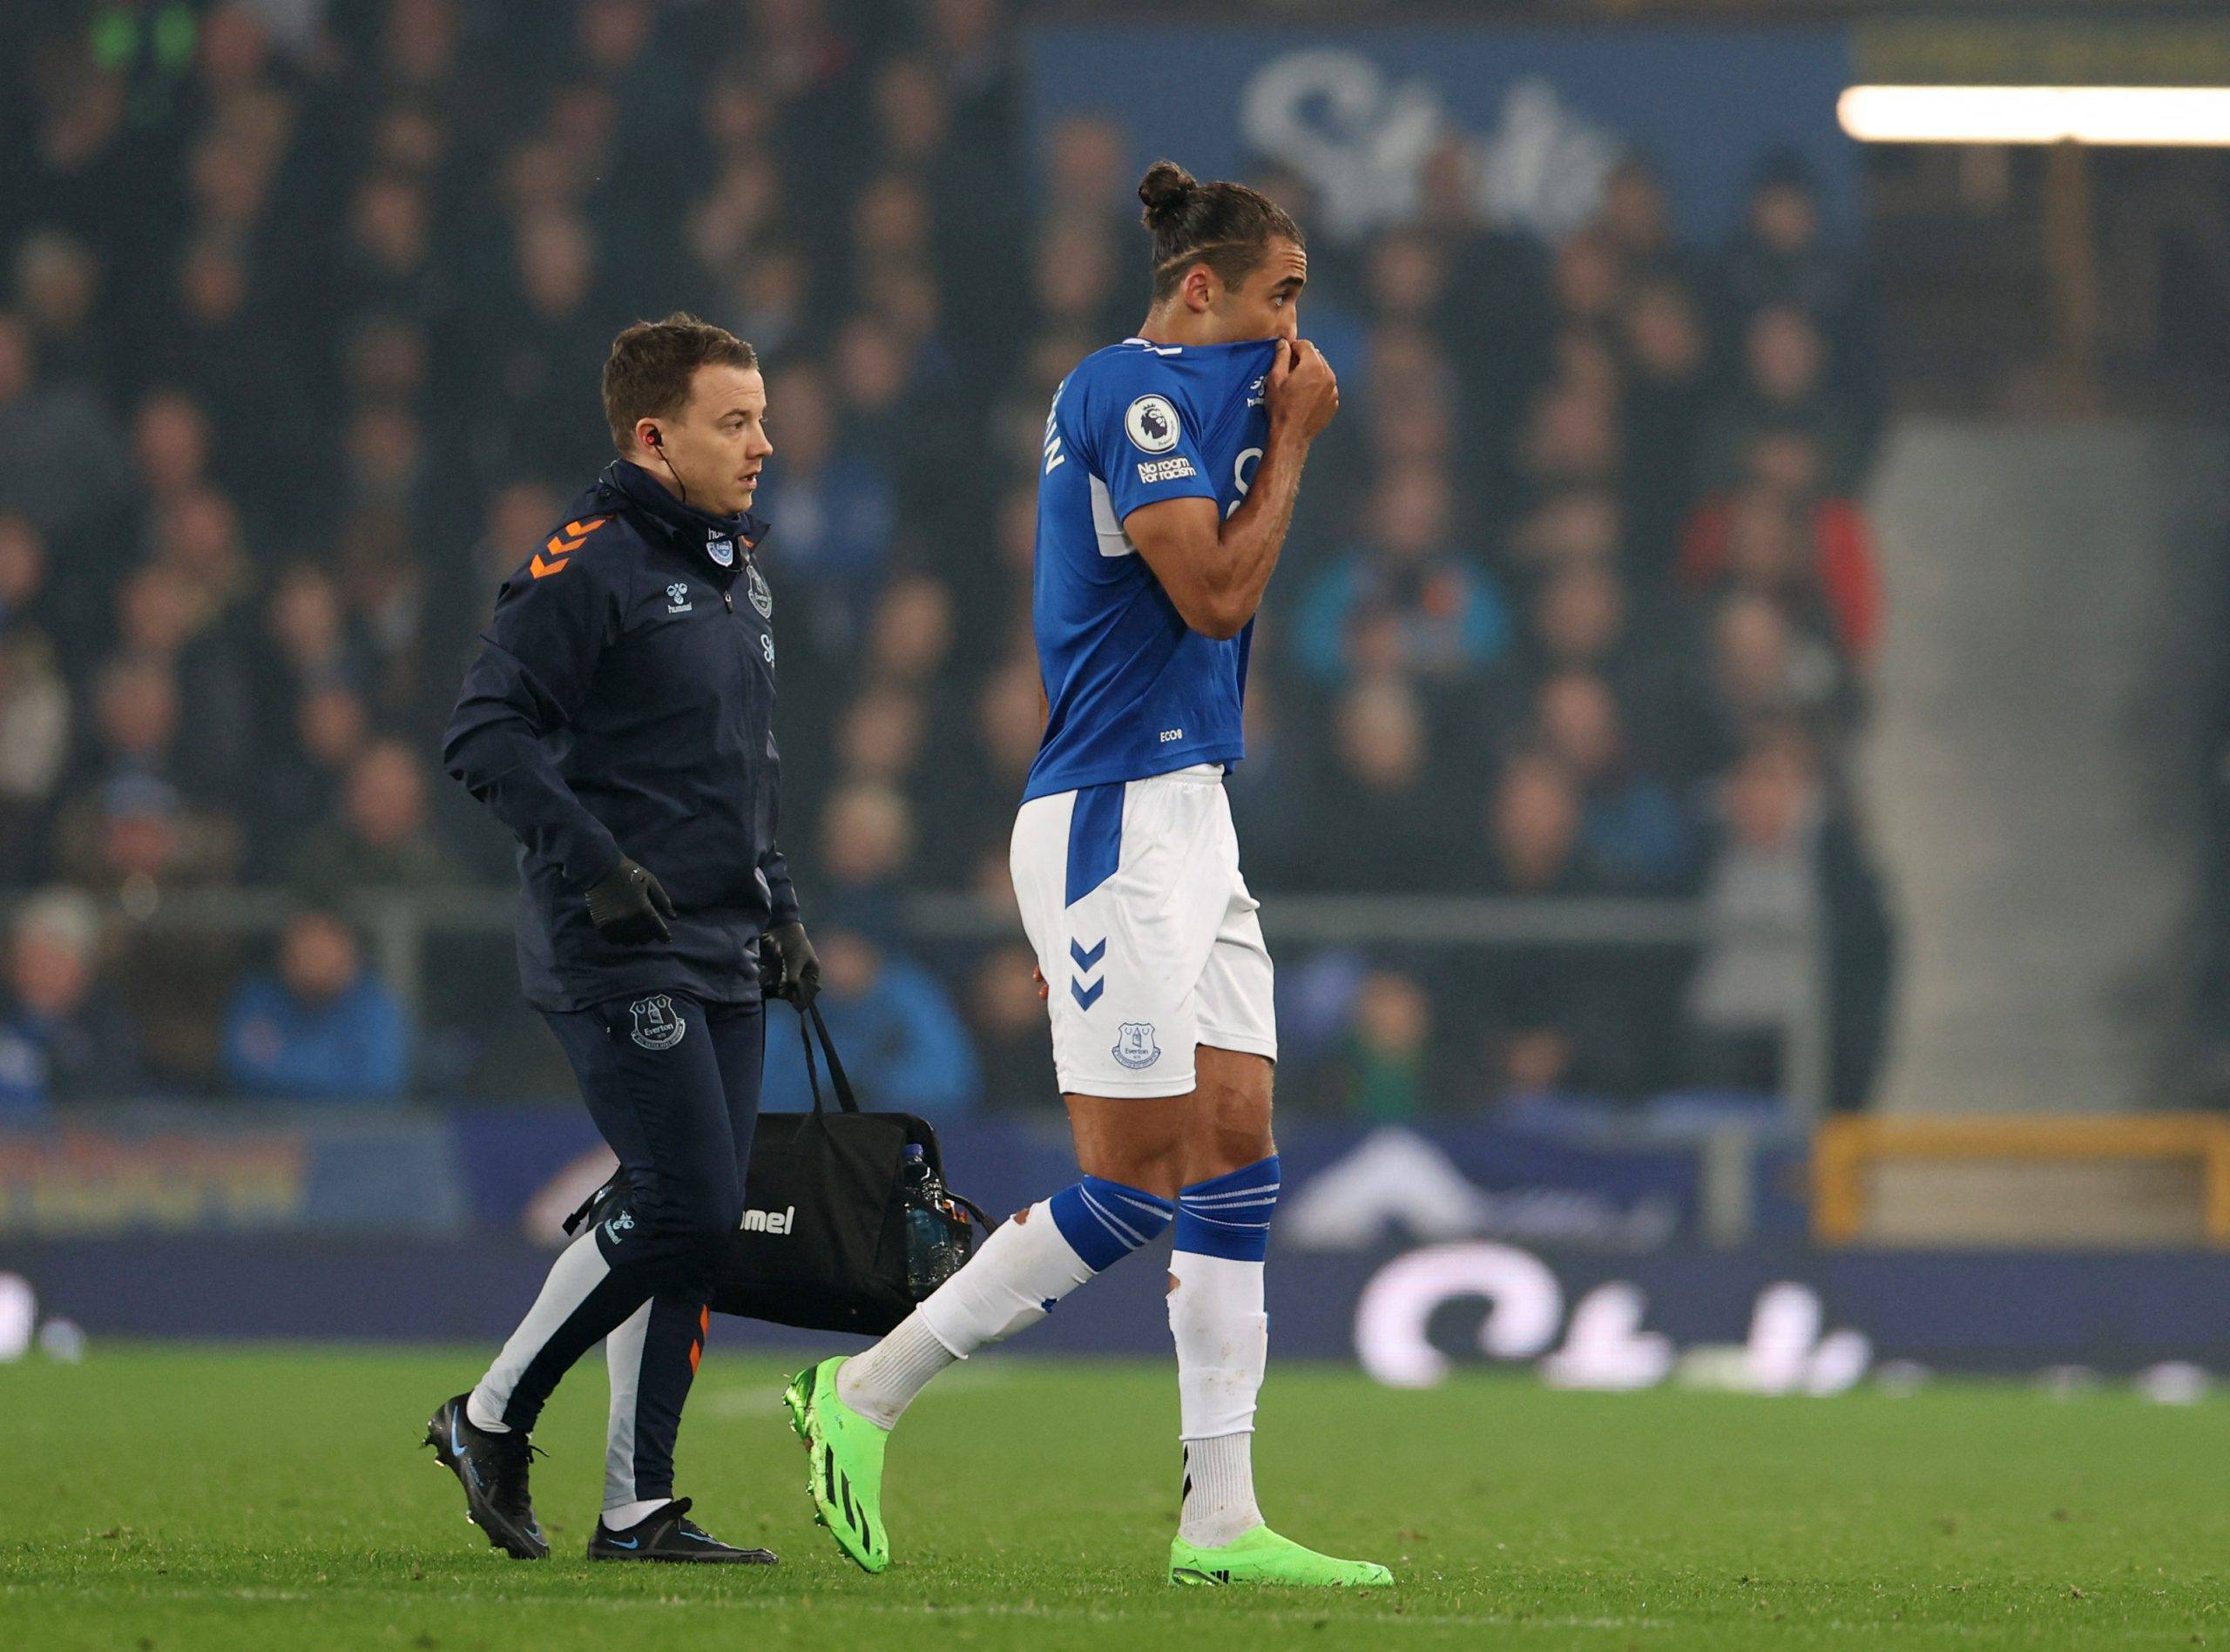 Everton: Dominic Calvert-Lewin could be injured for 'around 4-6 weeks' - Everton News